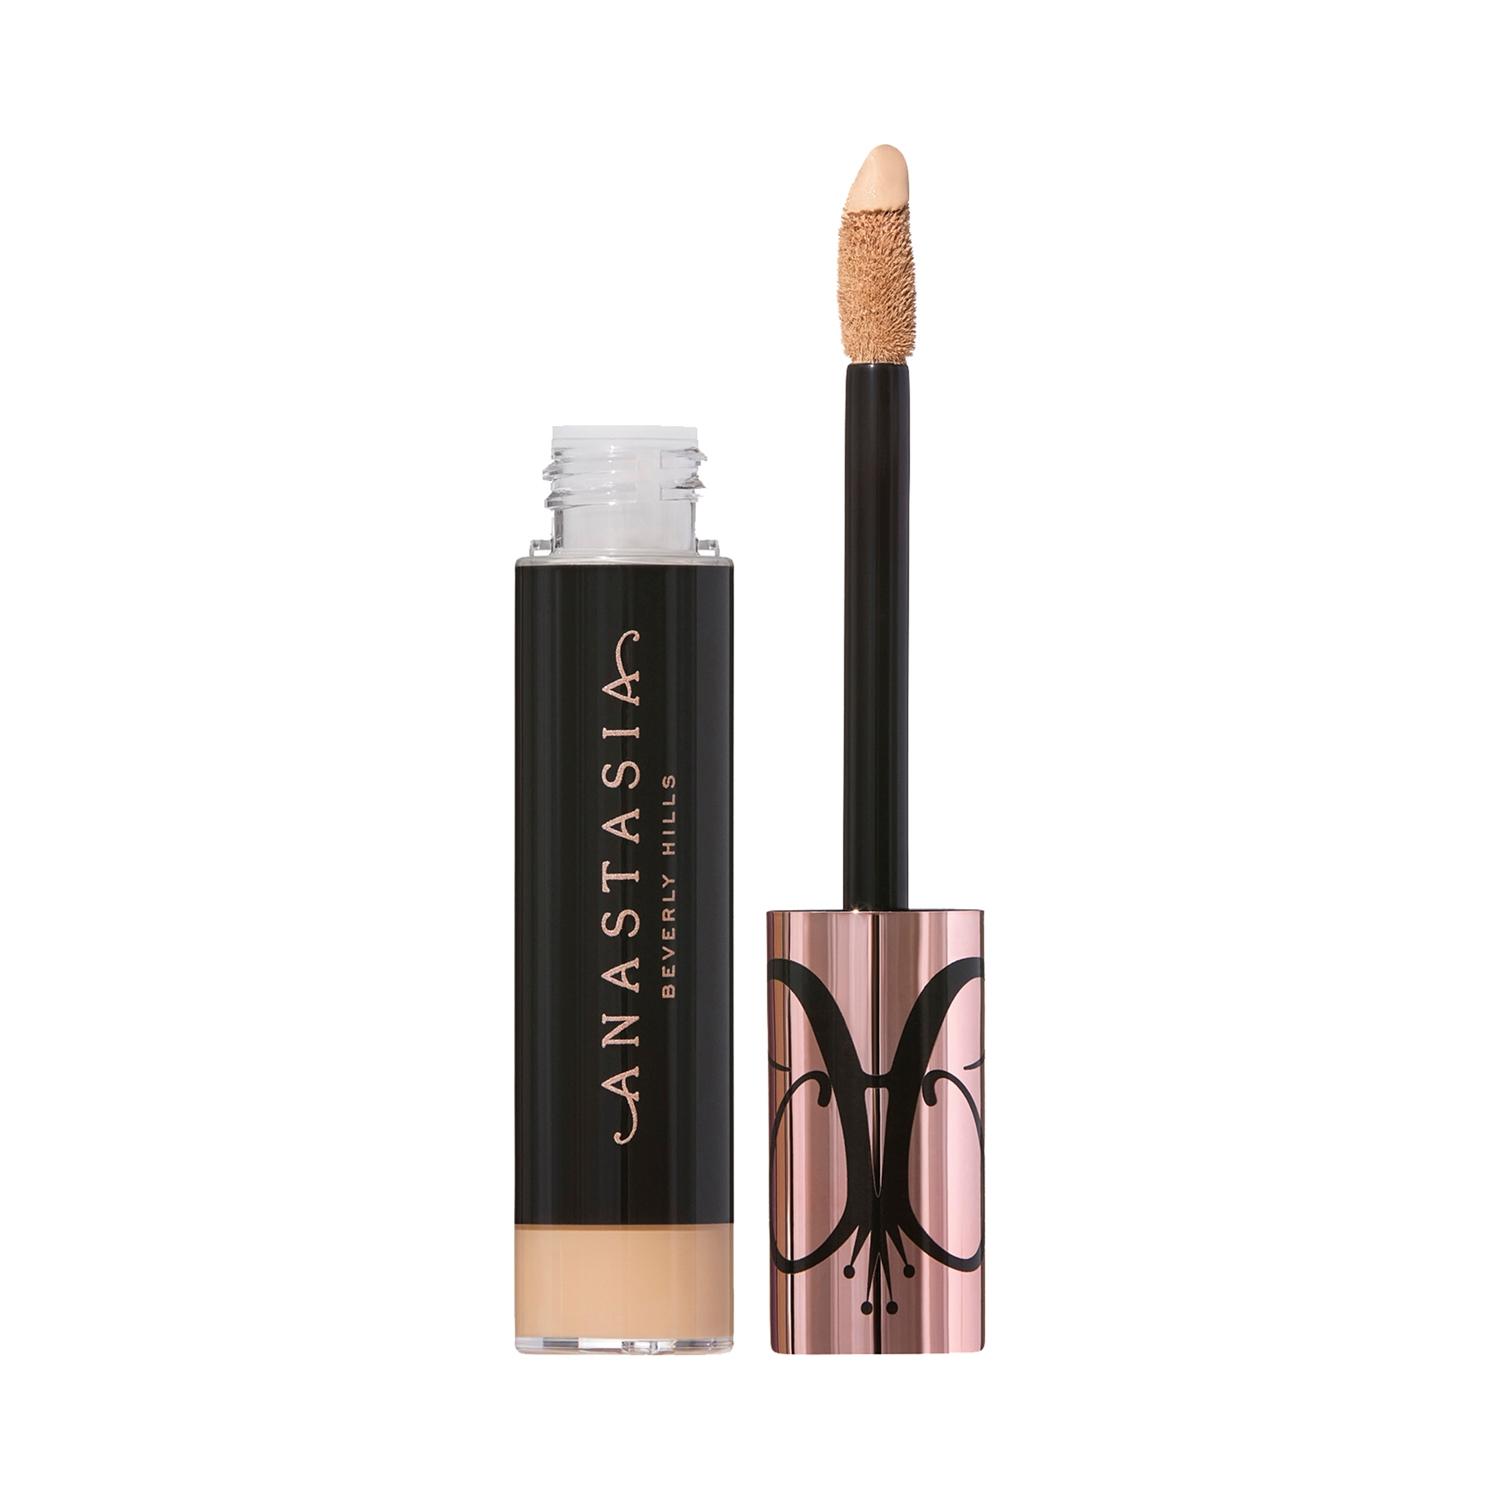 anastasia-beverly-hills-magic-touch-concealer---shade-13-(12ml)